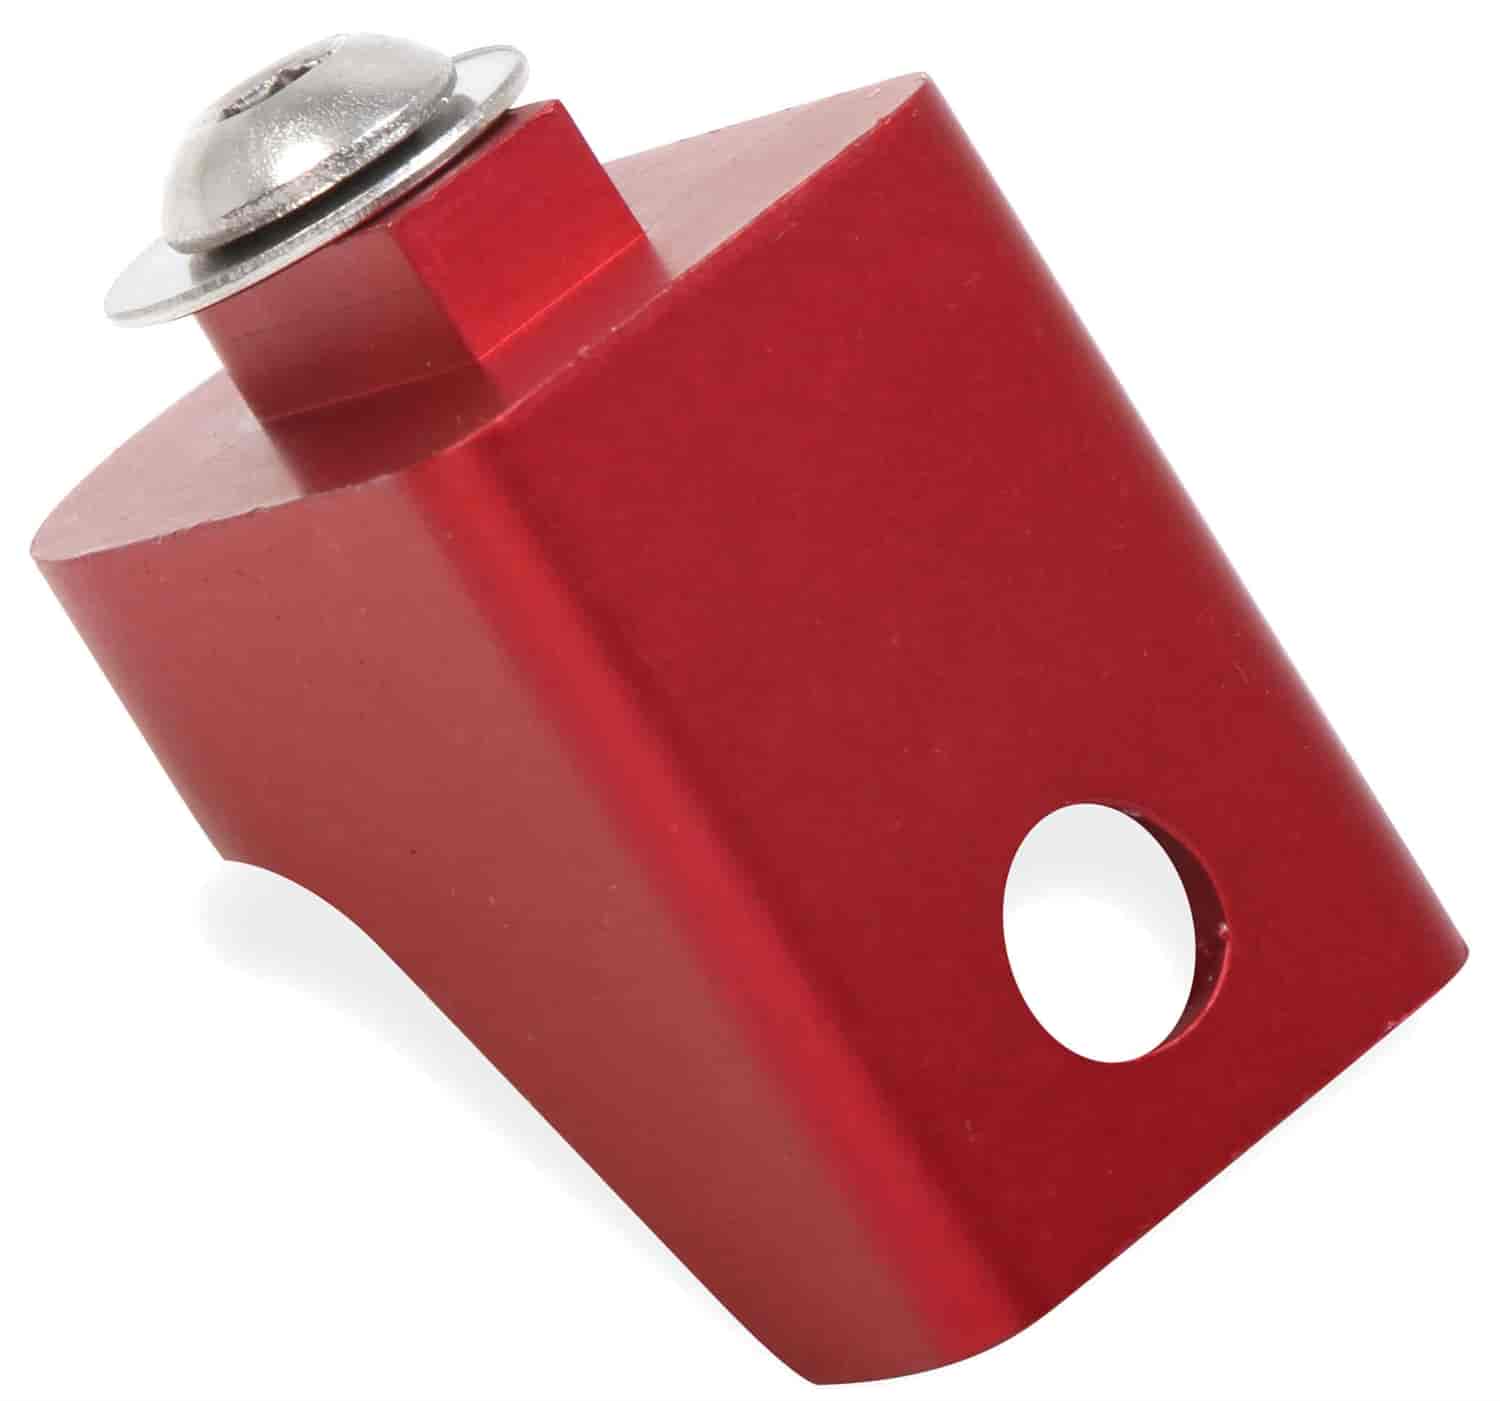 Cable Mount Bracket Fits Lokar-Style Cable, Use With Throttle Cable Bracket - Red Finish